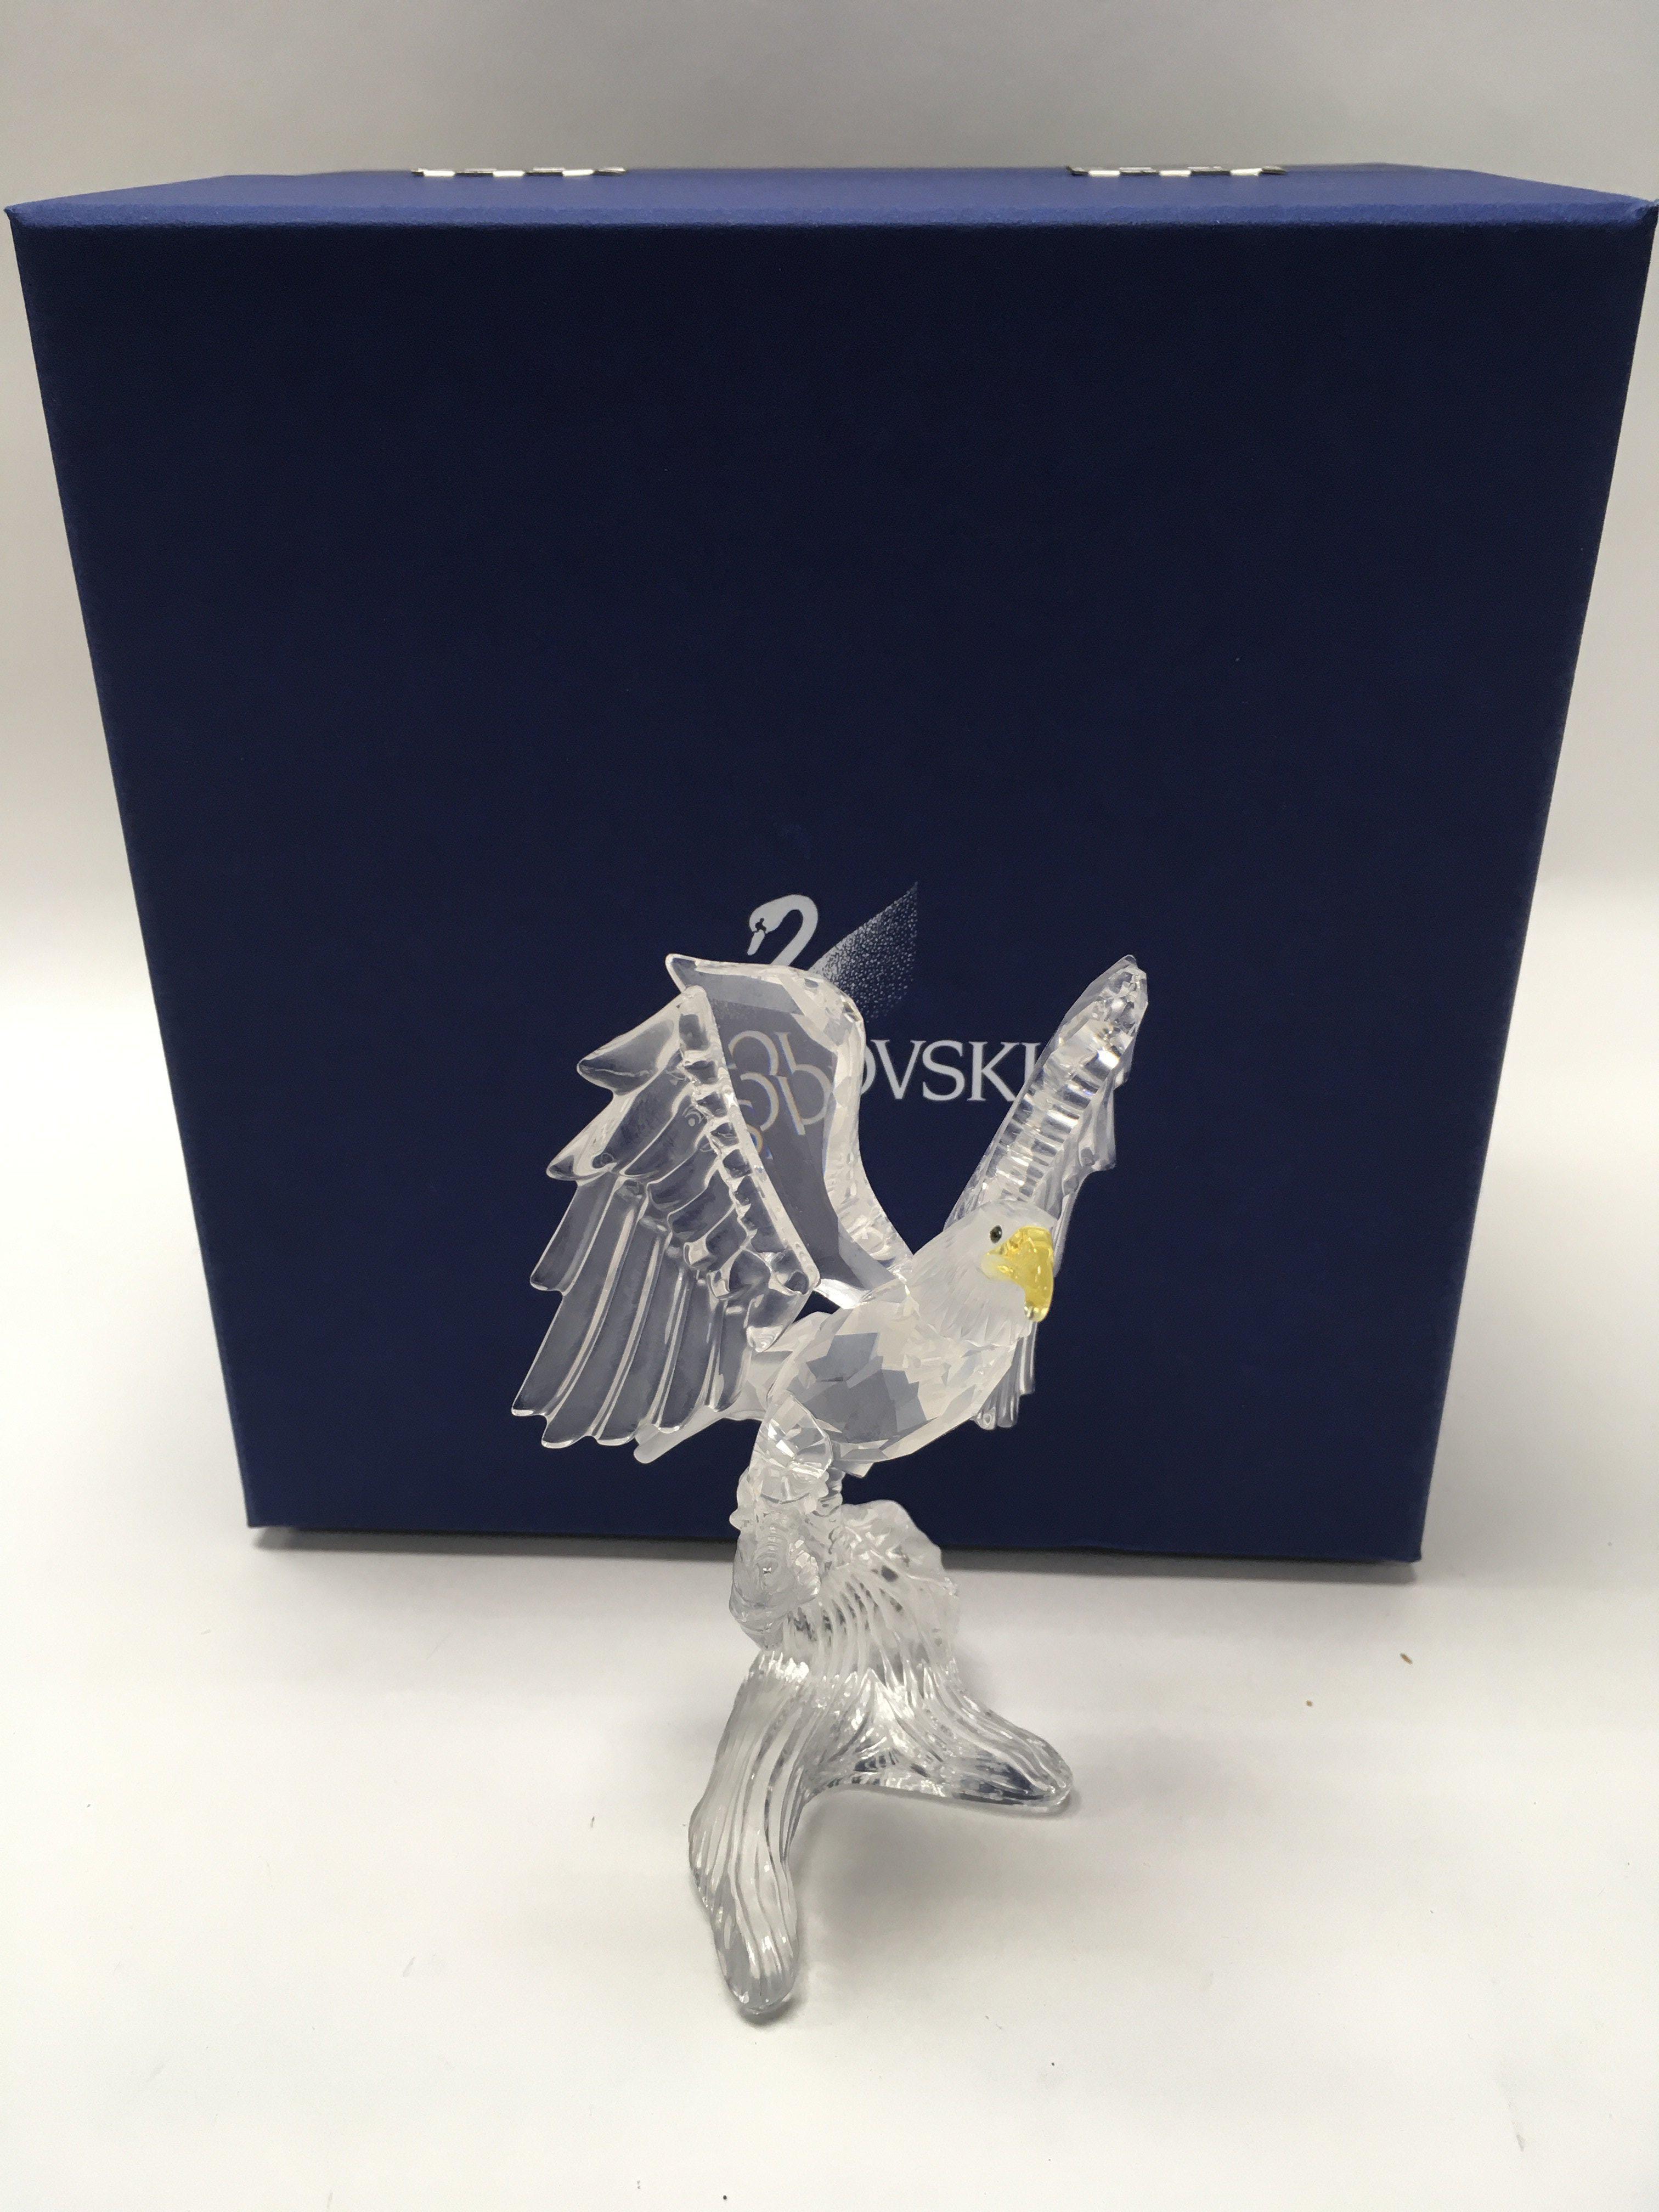 Swarovski Bald eagle inbox 12cm in height and appe - Image 2 of 2